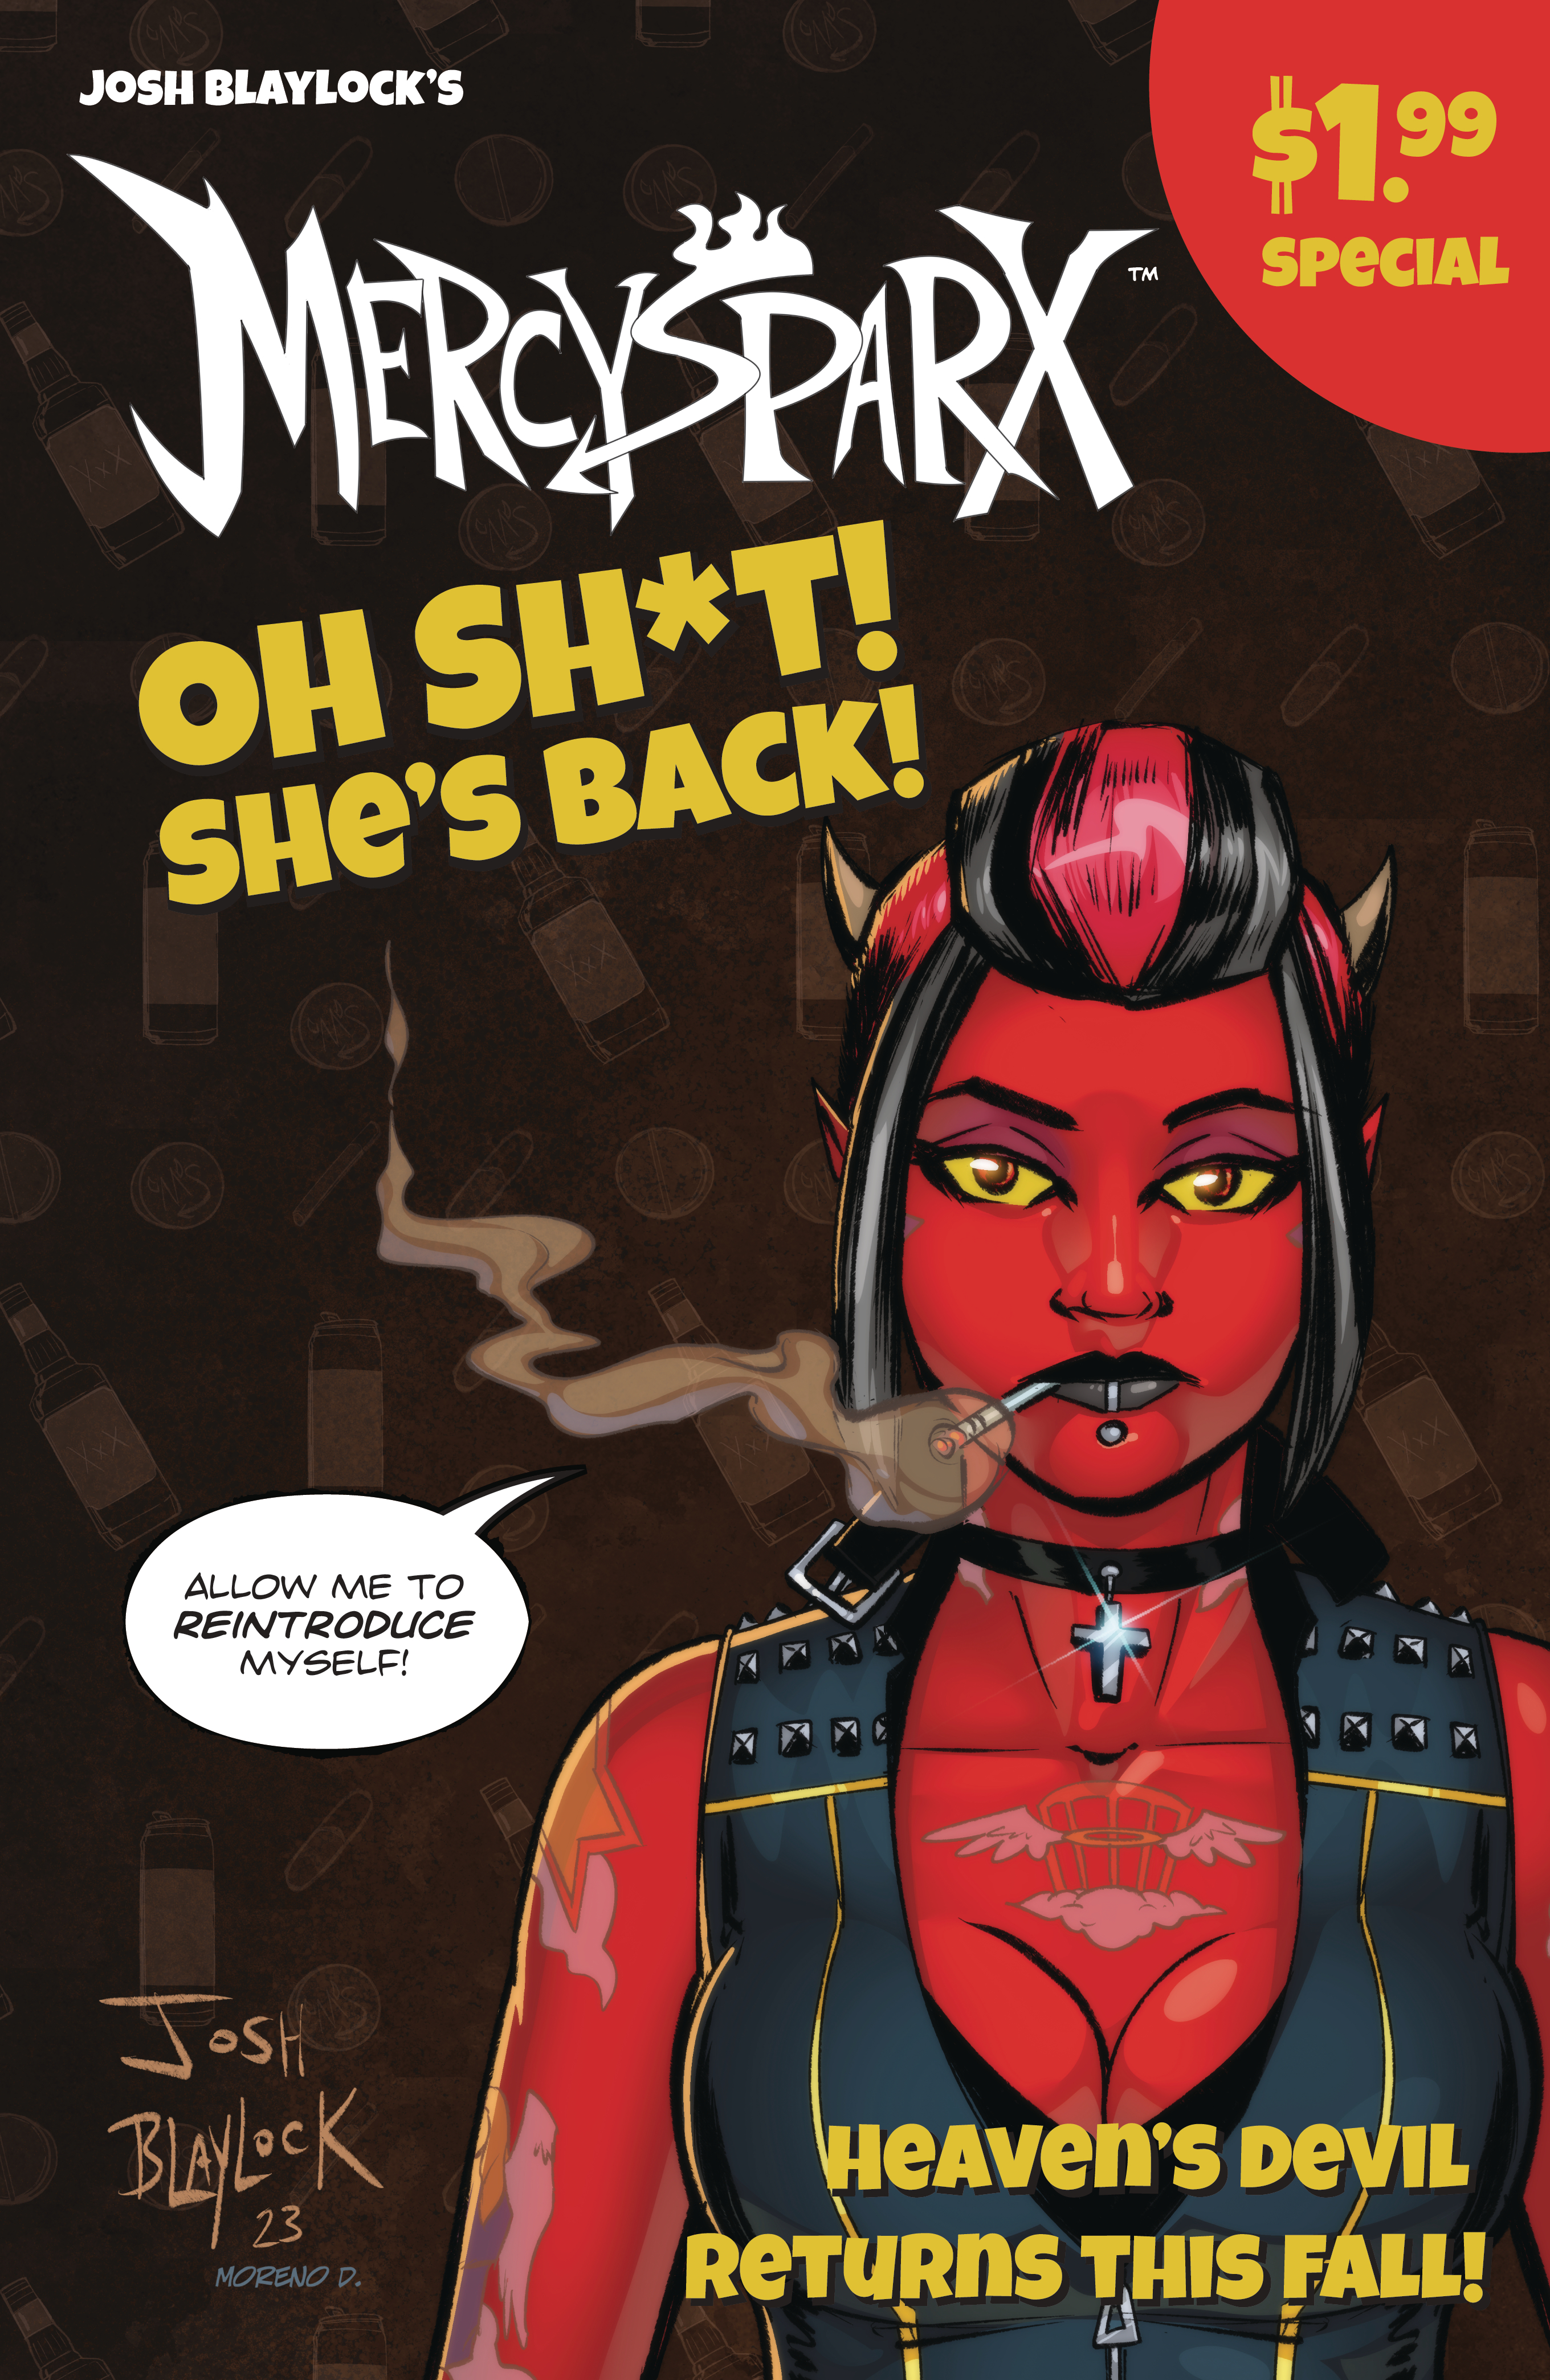 Mercy Sparx Oh S**t, She’s Back! $1.99 Special